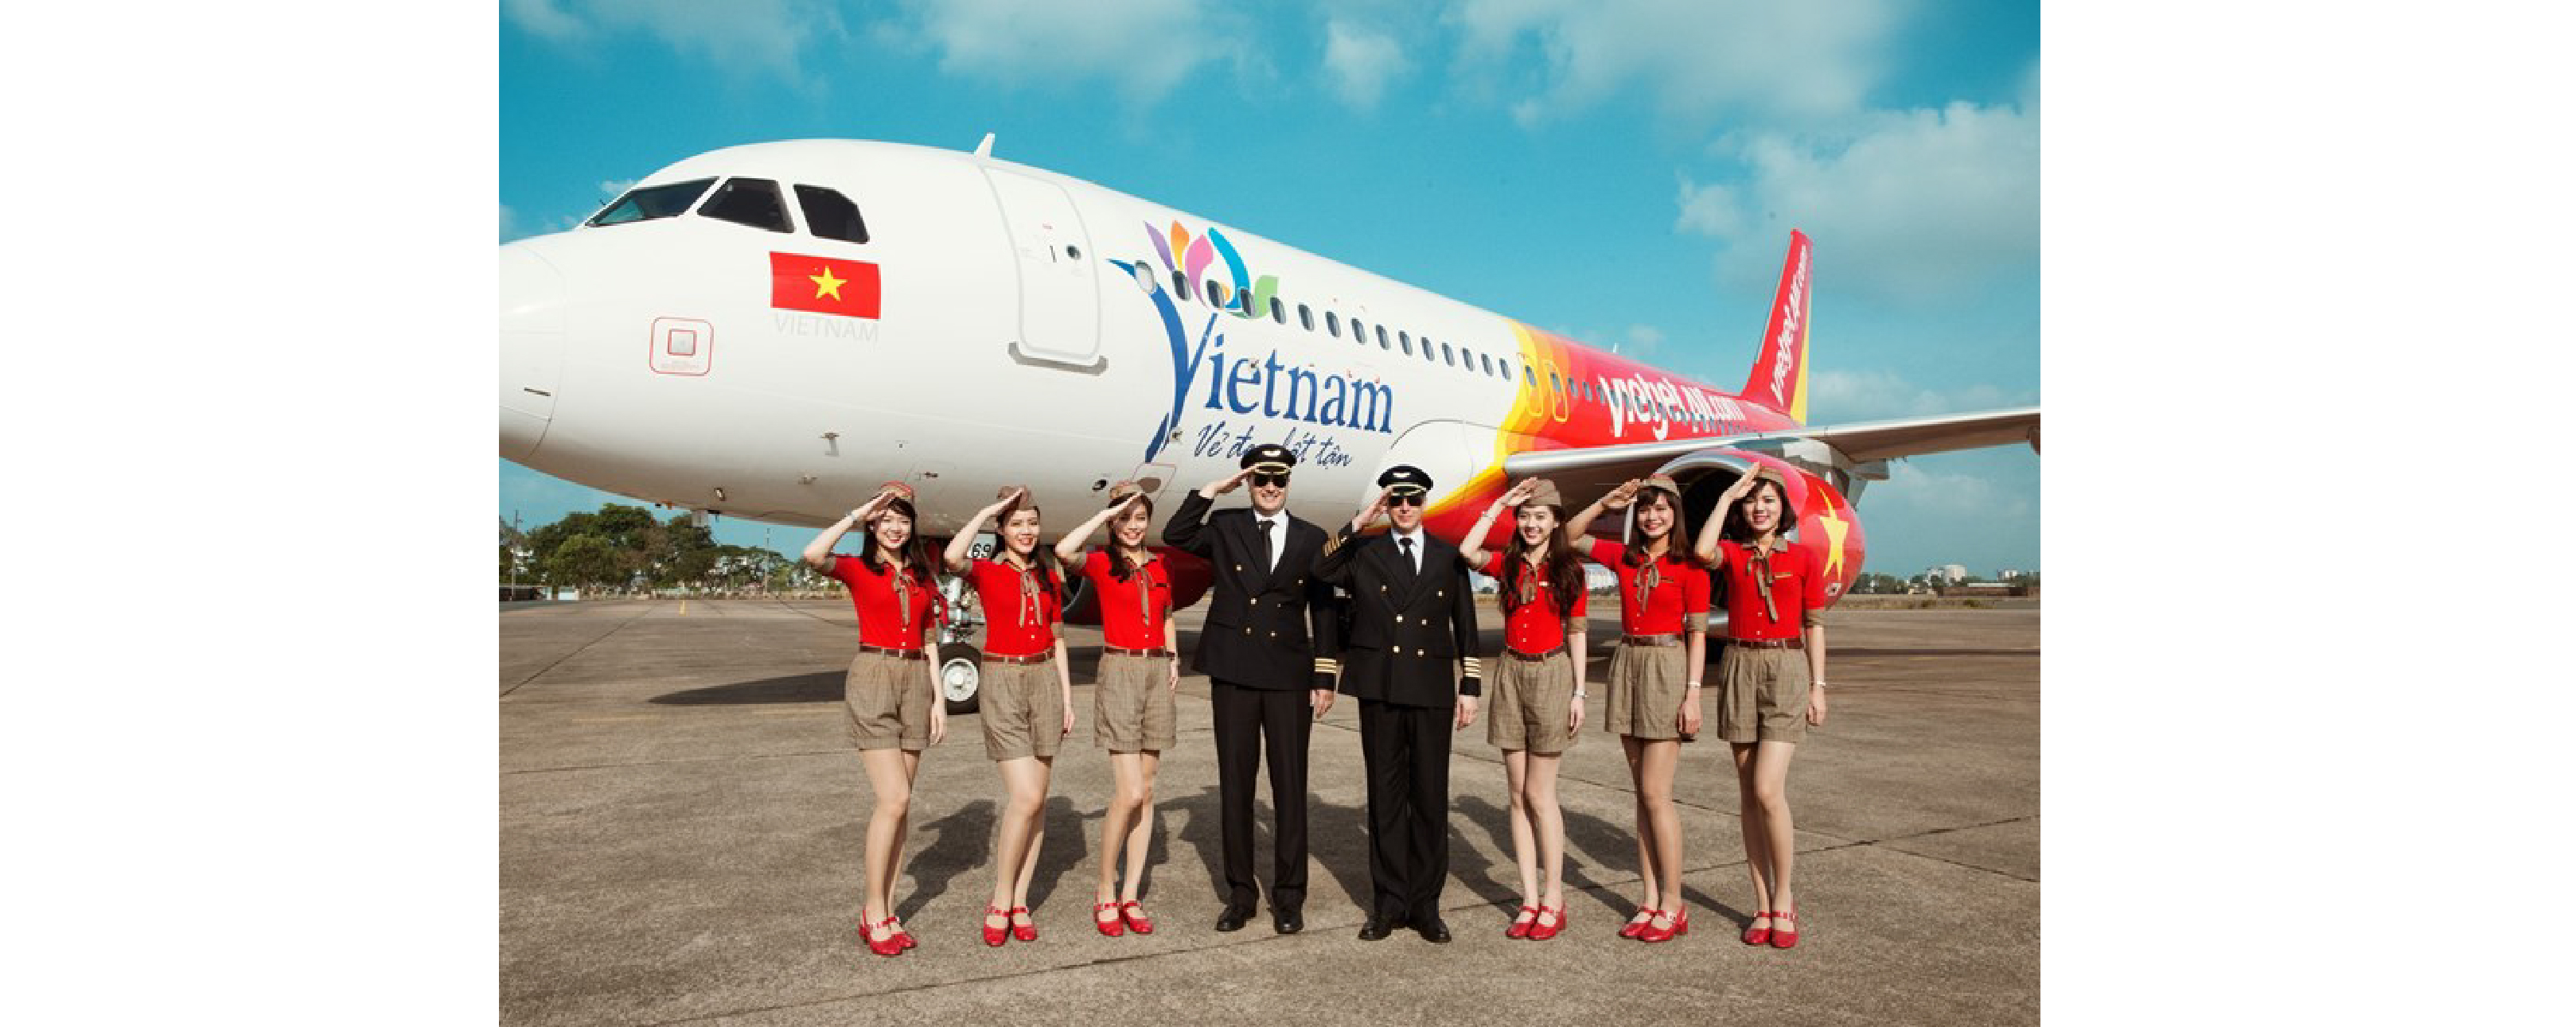 Boeing signs $11.3B contract with VietJet Air